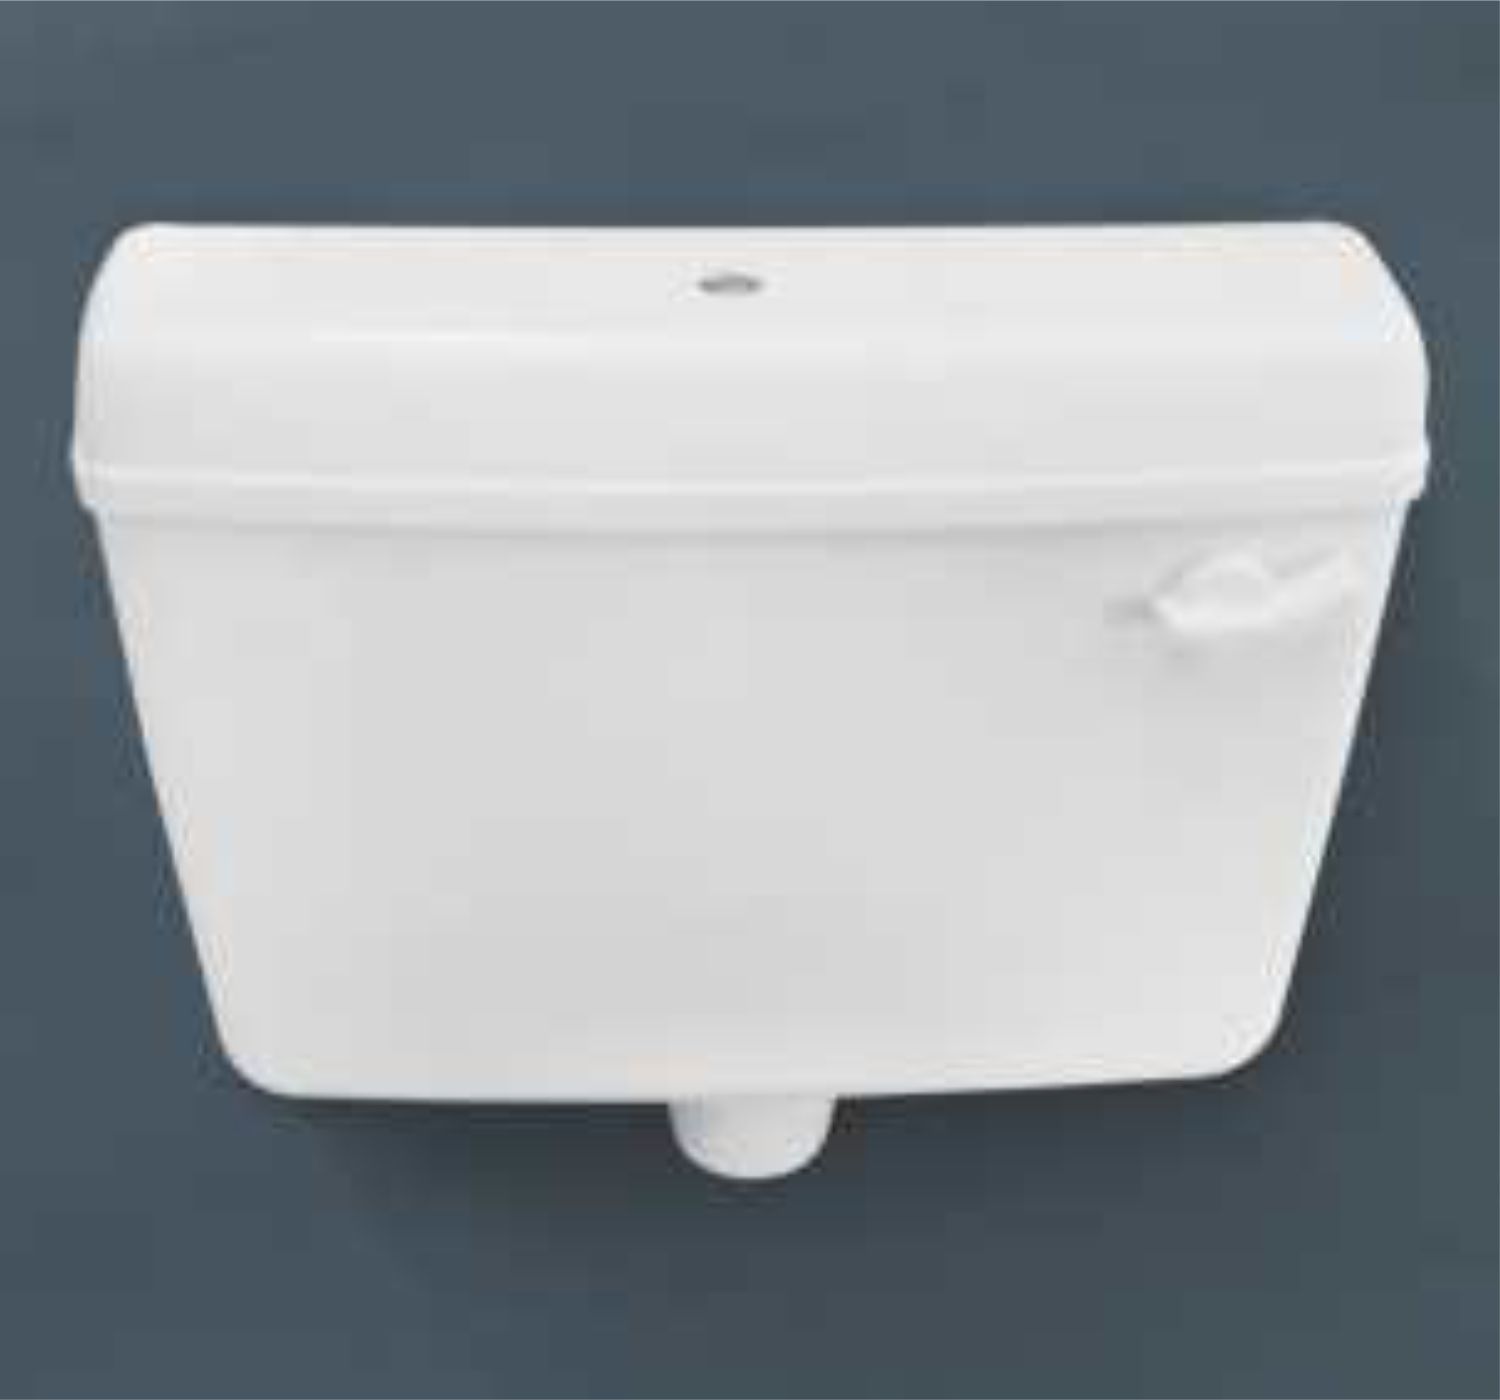 Bathroom Accessories – Indian & Eastern Toilet Seat Covers, Plastic Cistern